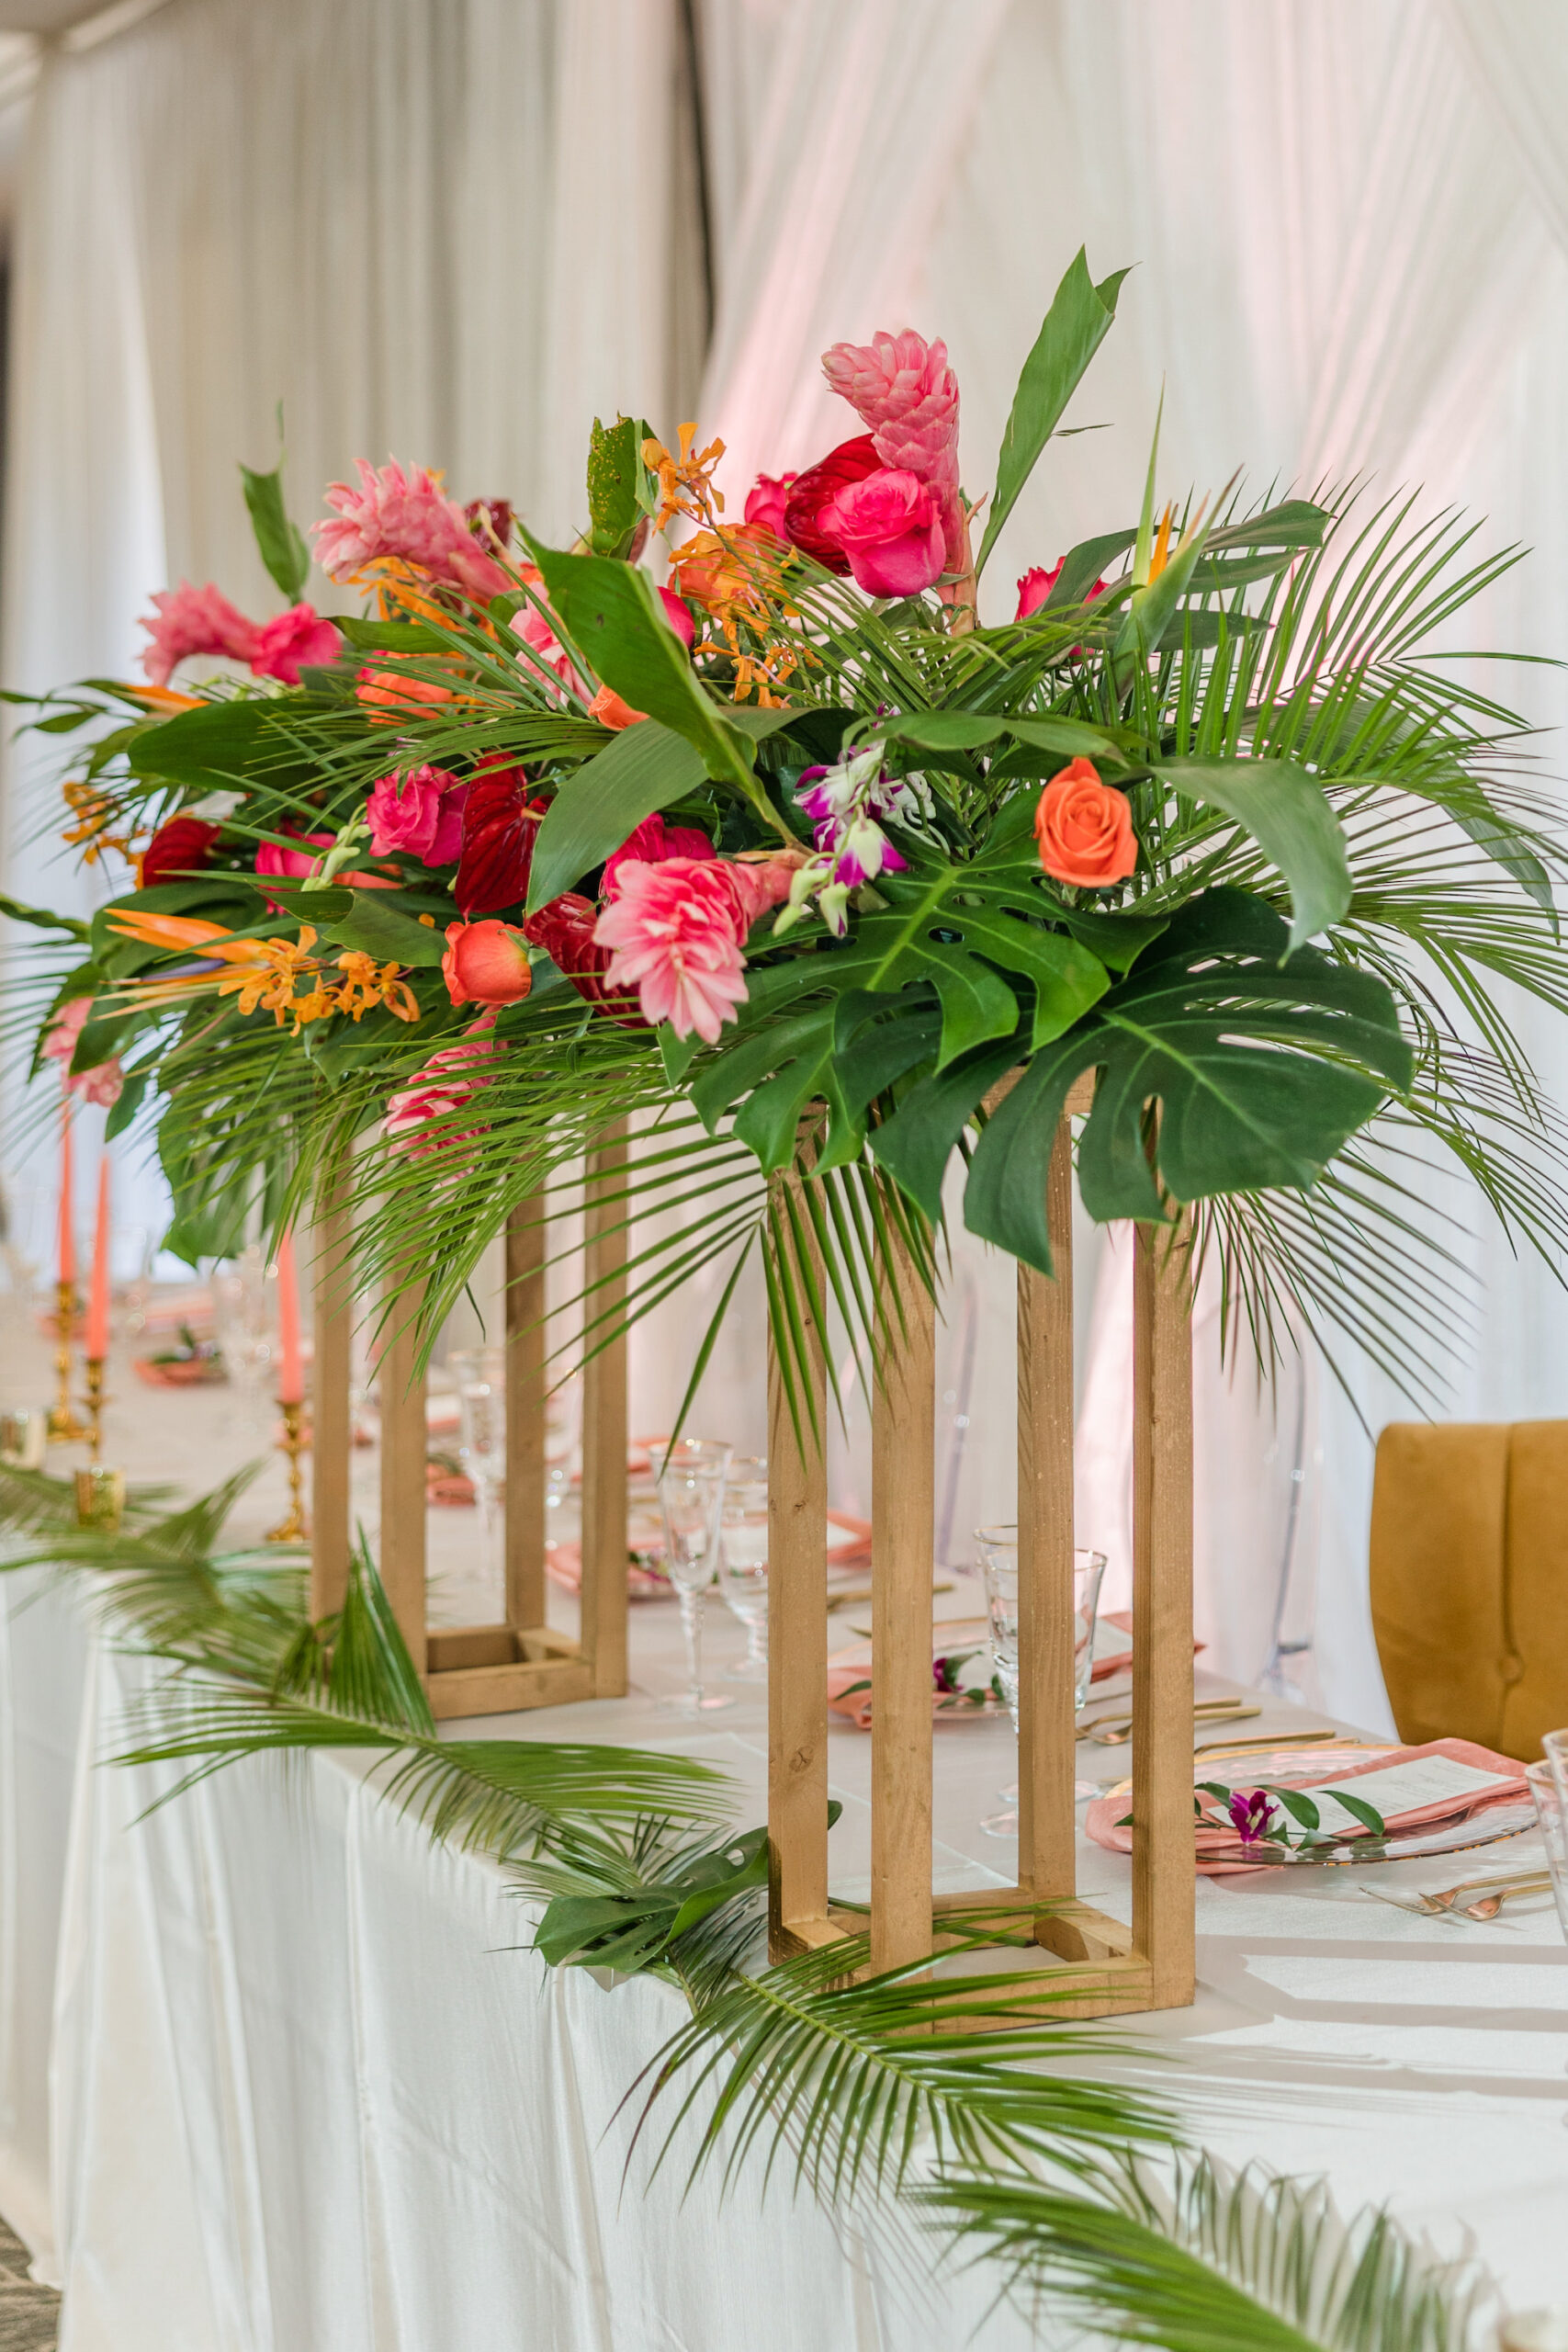 Tropical Wooden Tall Floral Vase Wedding Reception Centerpiece Ideas | Tampa Bay Florist Save the Date Florida